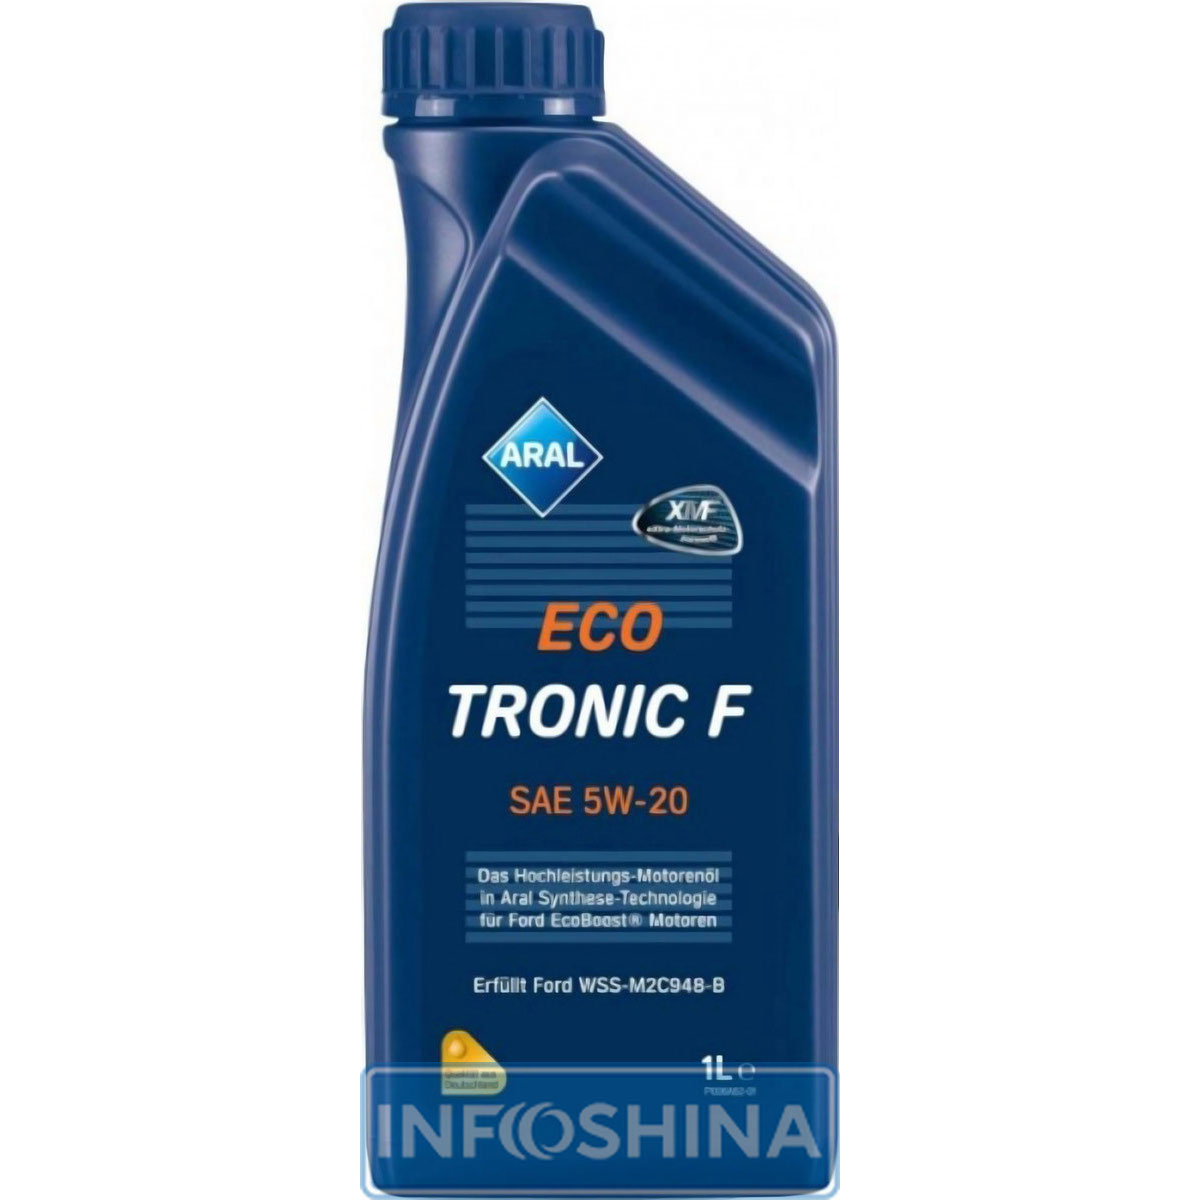 Aral EcoTronic F 5W-20